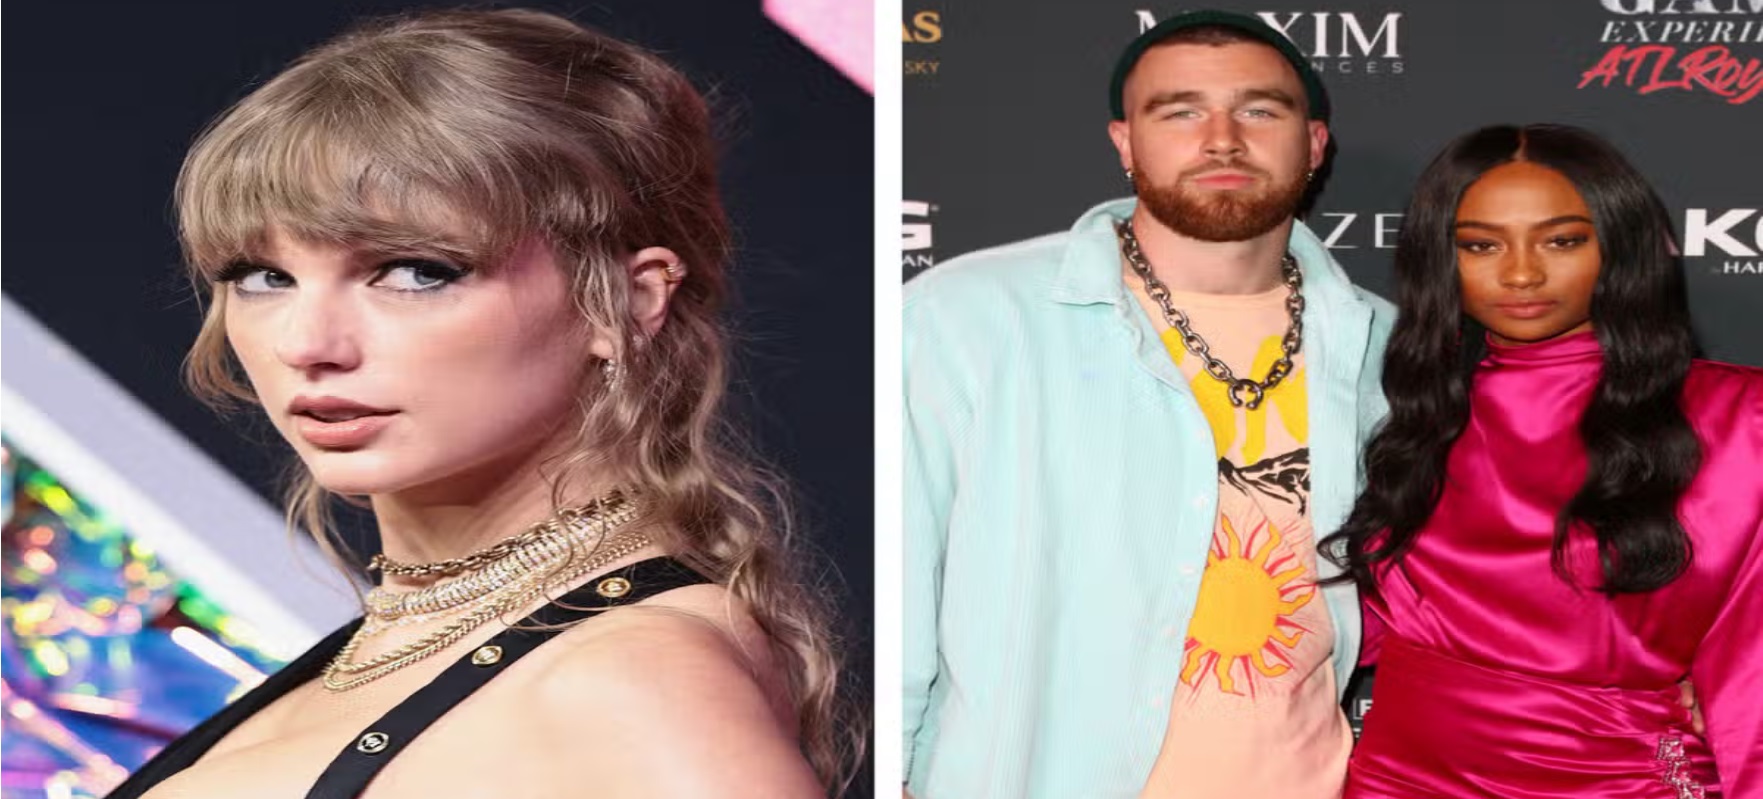 Still smarting from a love gone wrong with the high-profile Travis Kelce, his ex, Kayla Nicole, bluntly declared, ''Travis? He's all about seizing opportunities, and you know what? It's....